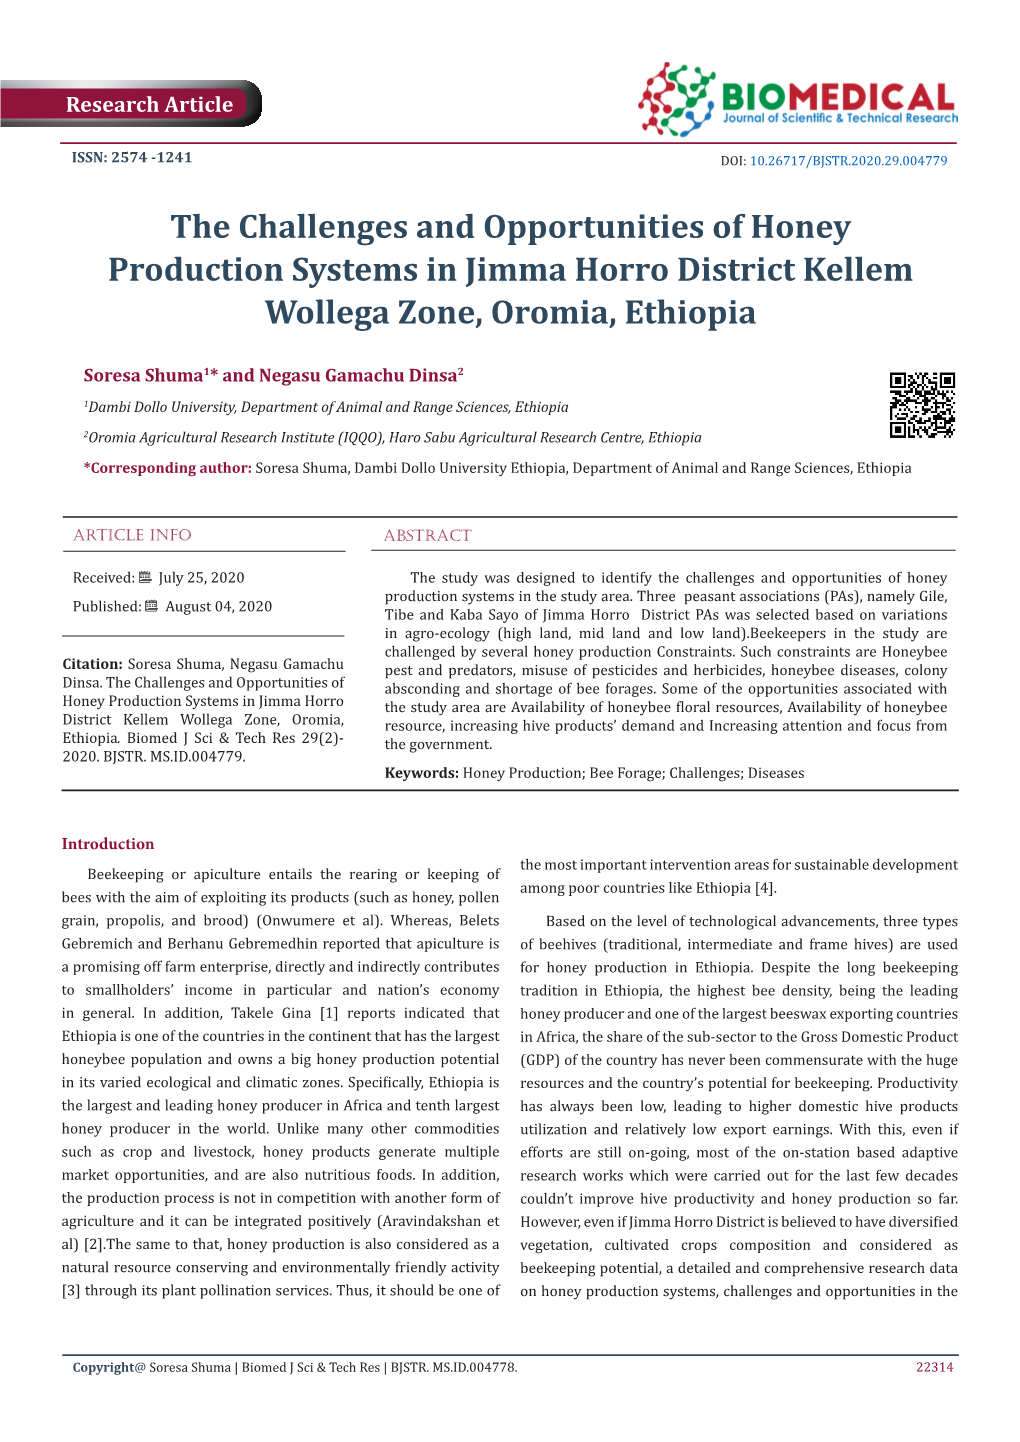 The Challenges and Opportunities of Honey Production Systems in Jimma Horro District Kellem Wollega Zone, Oromia, Ethiopia